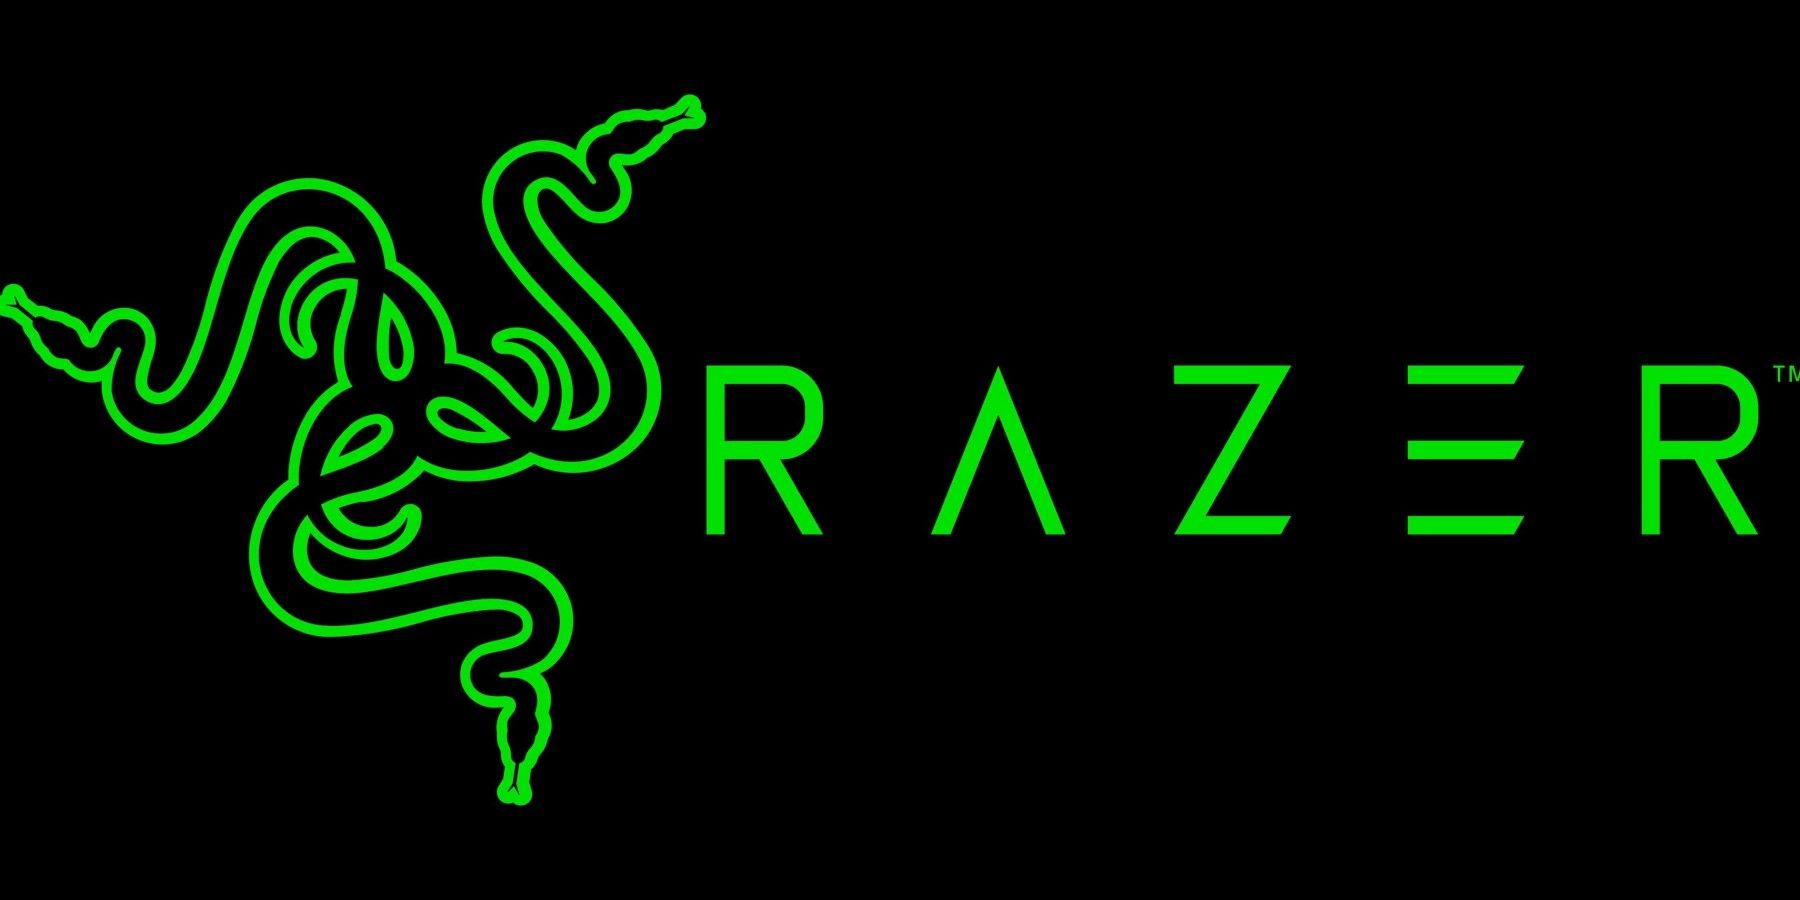 Razer Releasing Noise-Canceling Wireless Earbuds for Xbox
and PlayStation